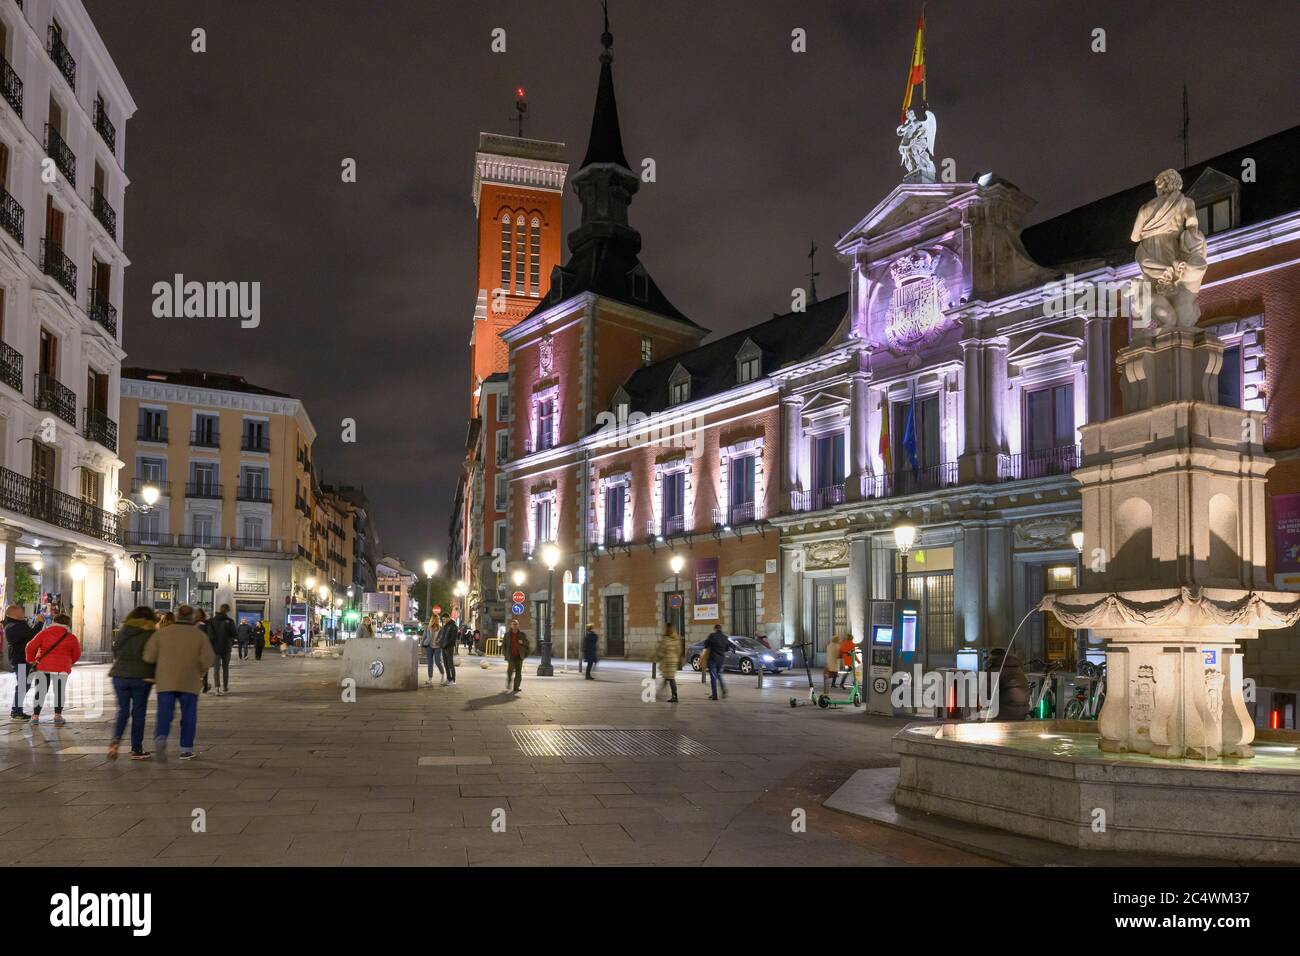 Evening in the Plaza de la Provincia with the Ministry of Foreign Affairs (right) and the  Church tower of Santa Cruz in the background., Madrid, Spai Stock Photo